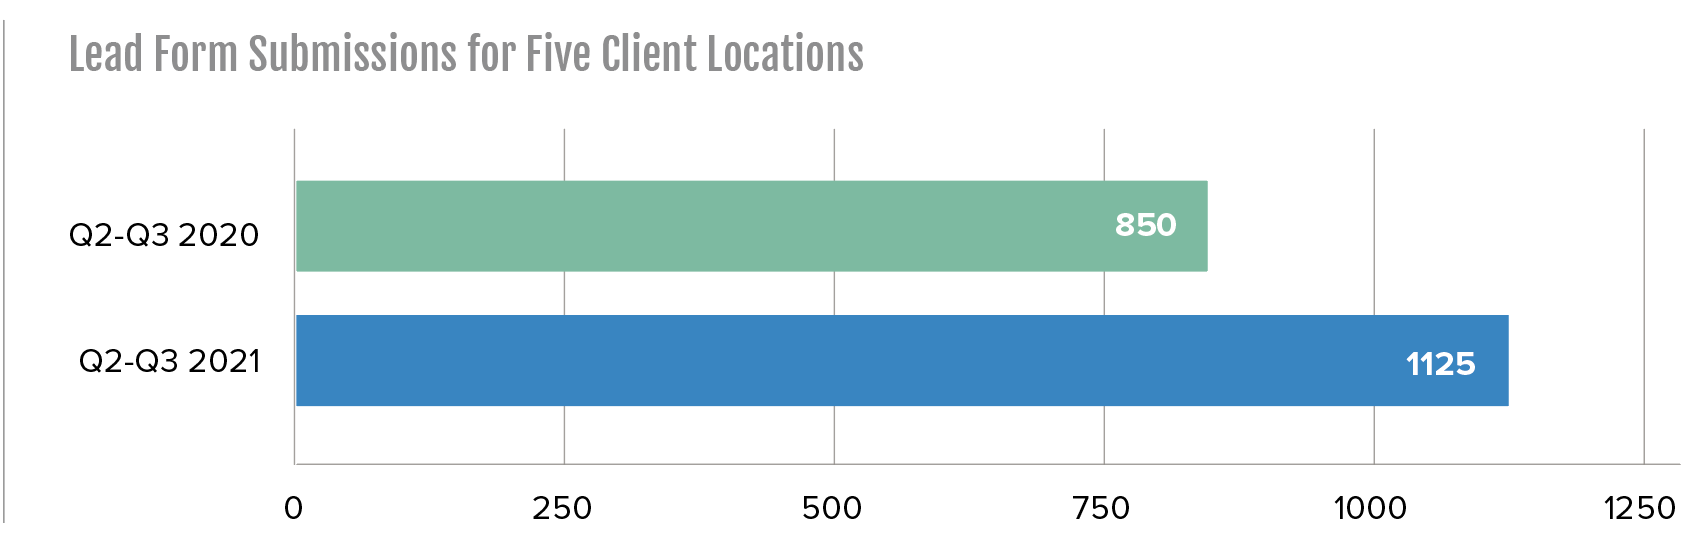 total lead form submissions for five client locations